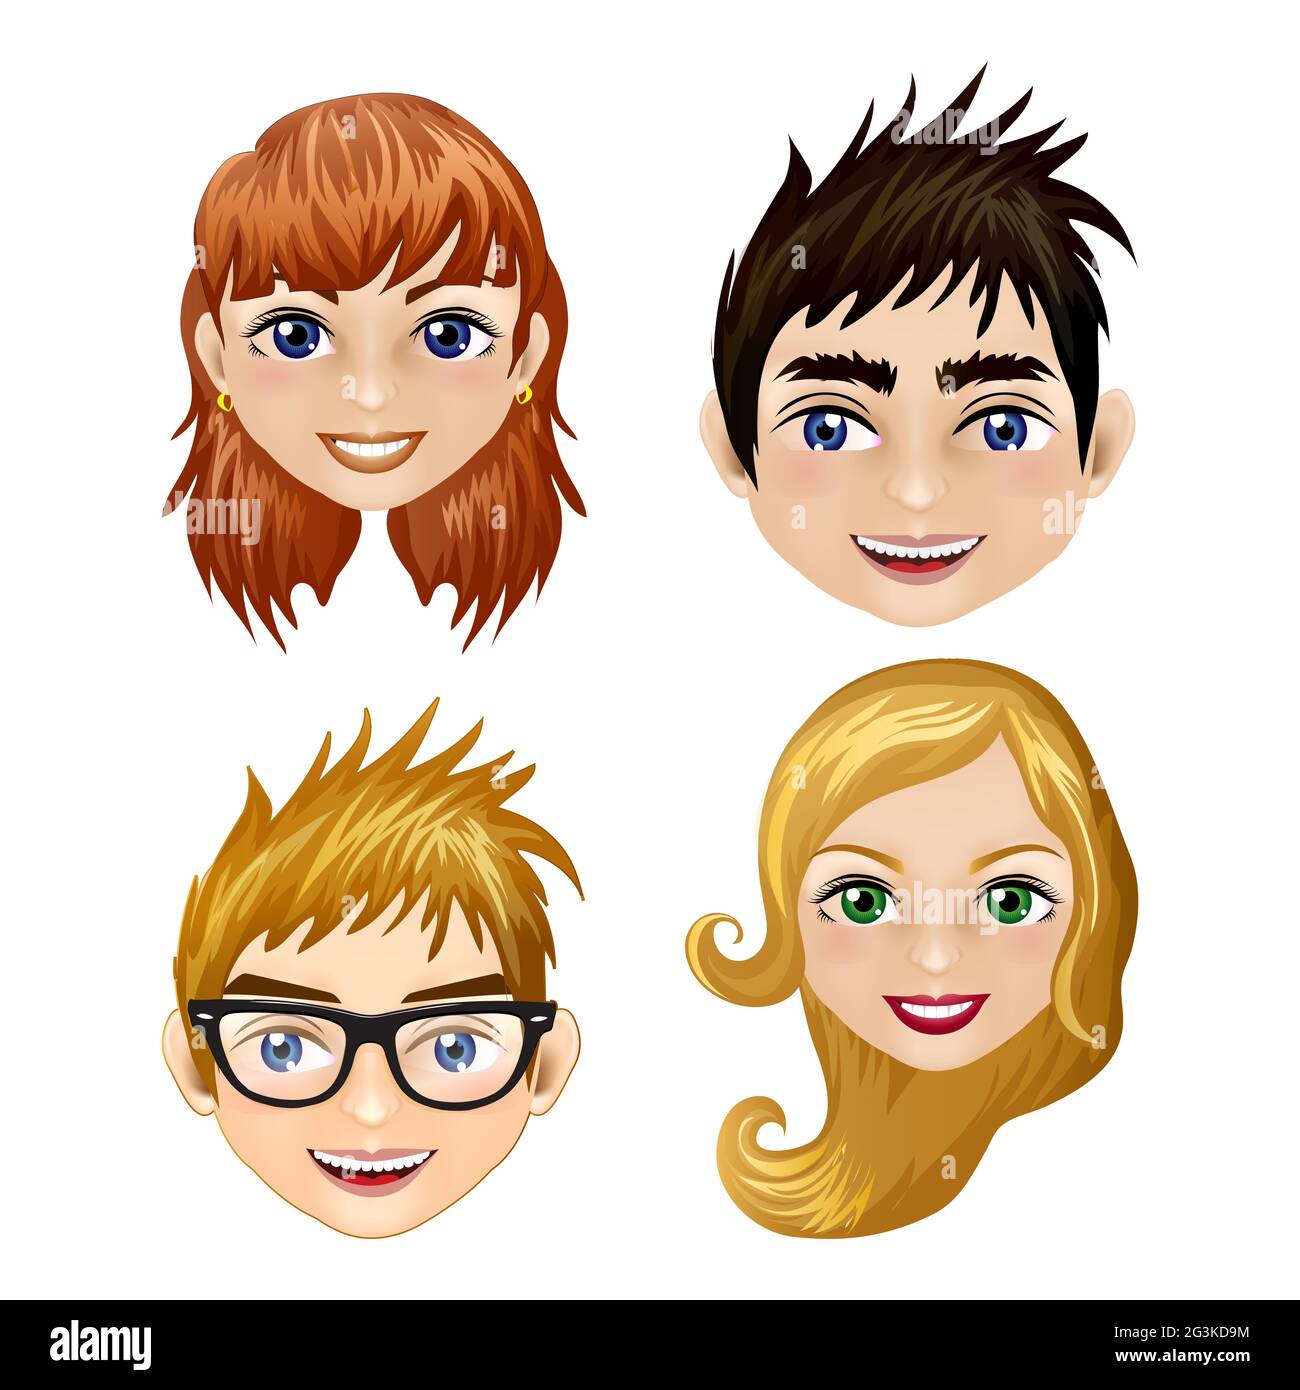 Illlustration set of different modern icons of children Stock Photo